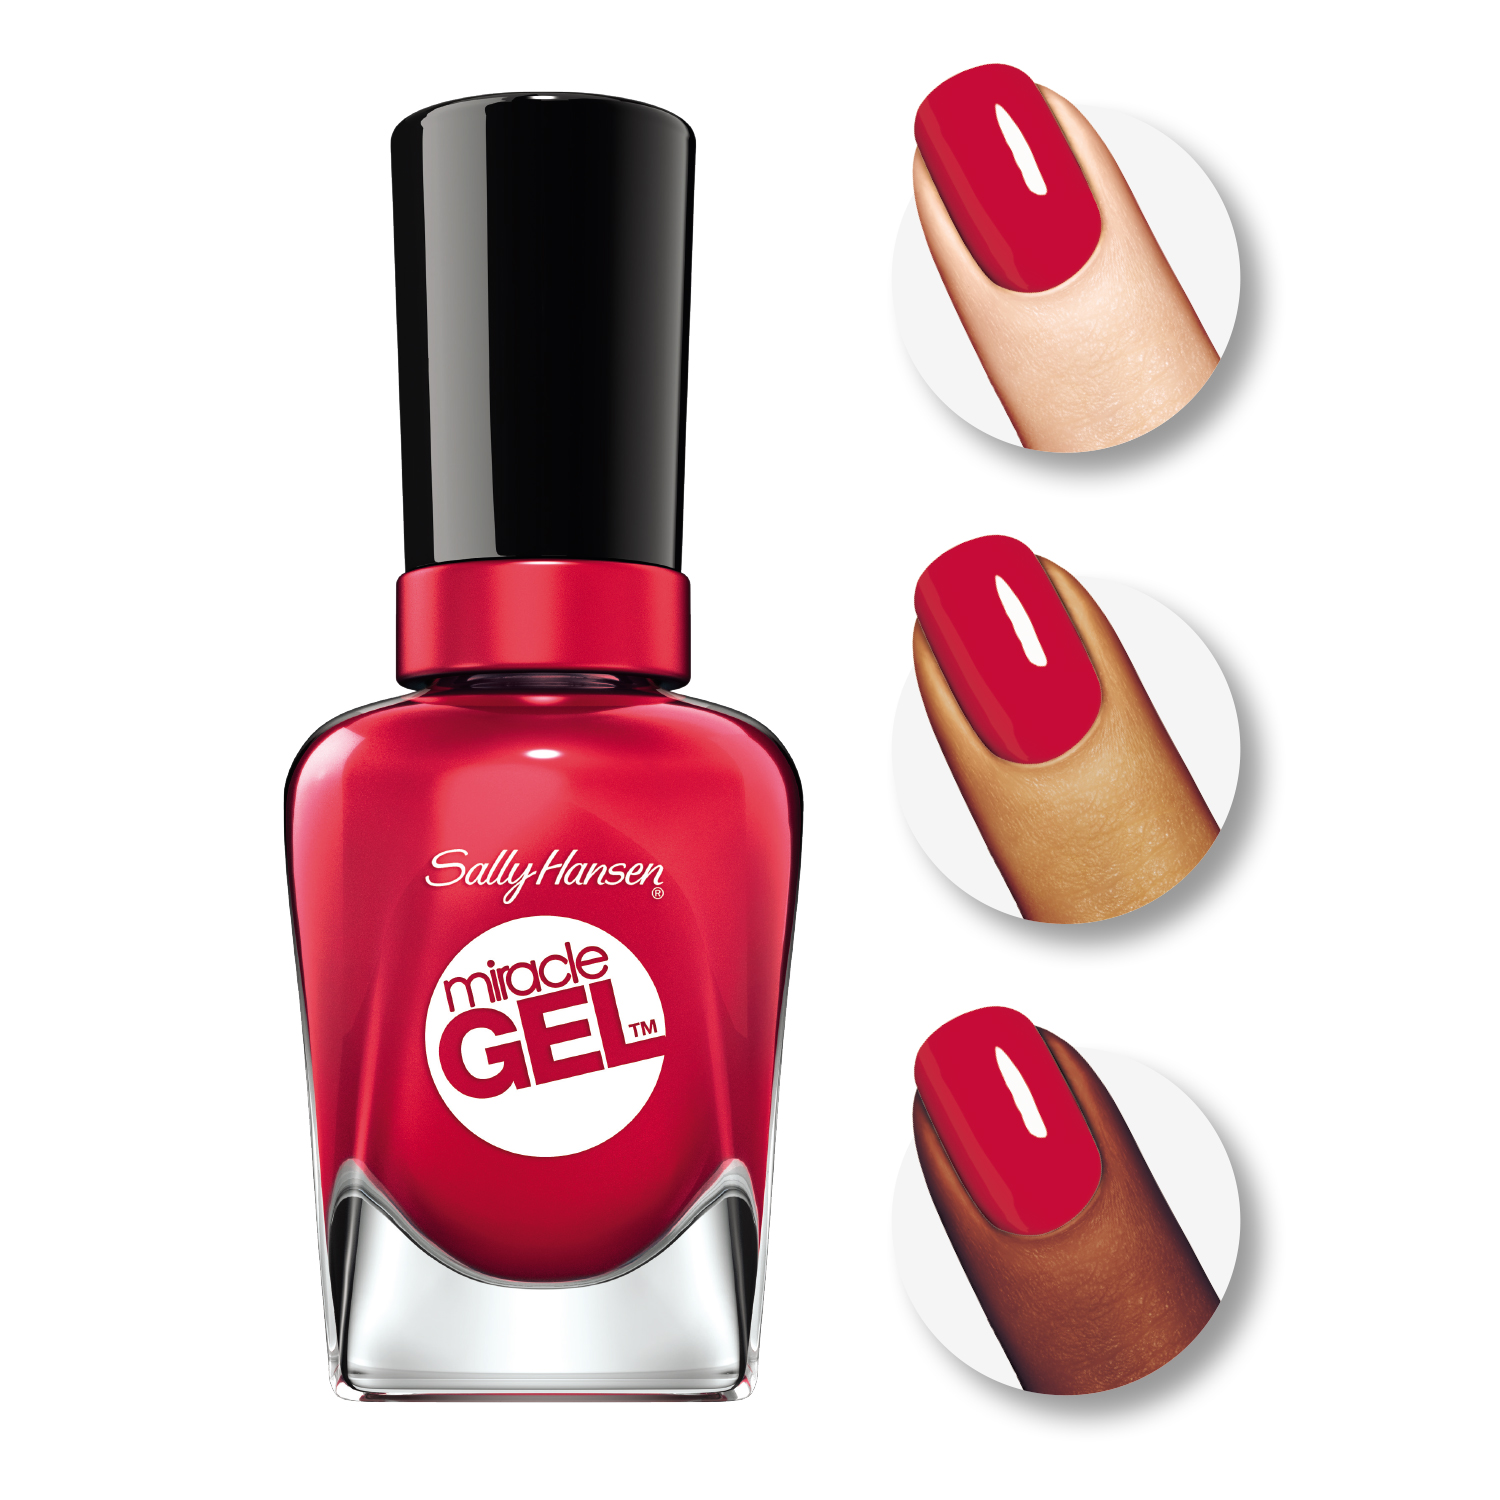 Sally Hansen -Miracle Gel -Off with her Red! -0.5 -fl oz - image 3 of 4